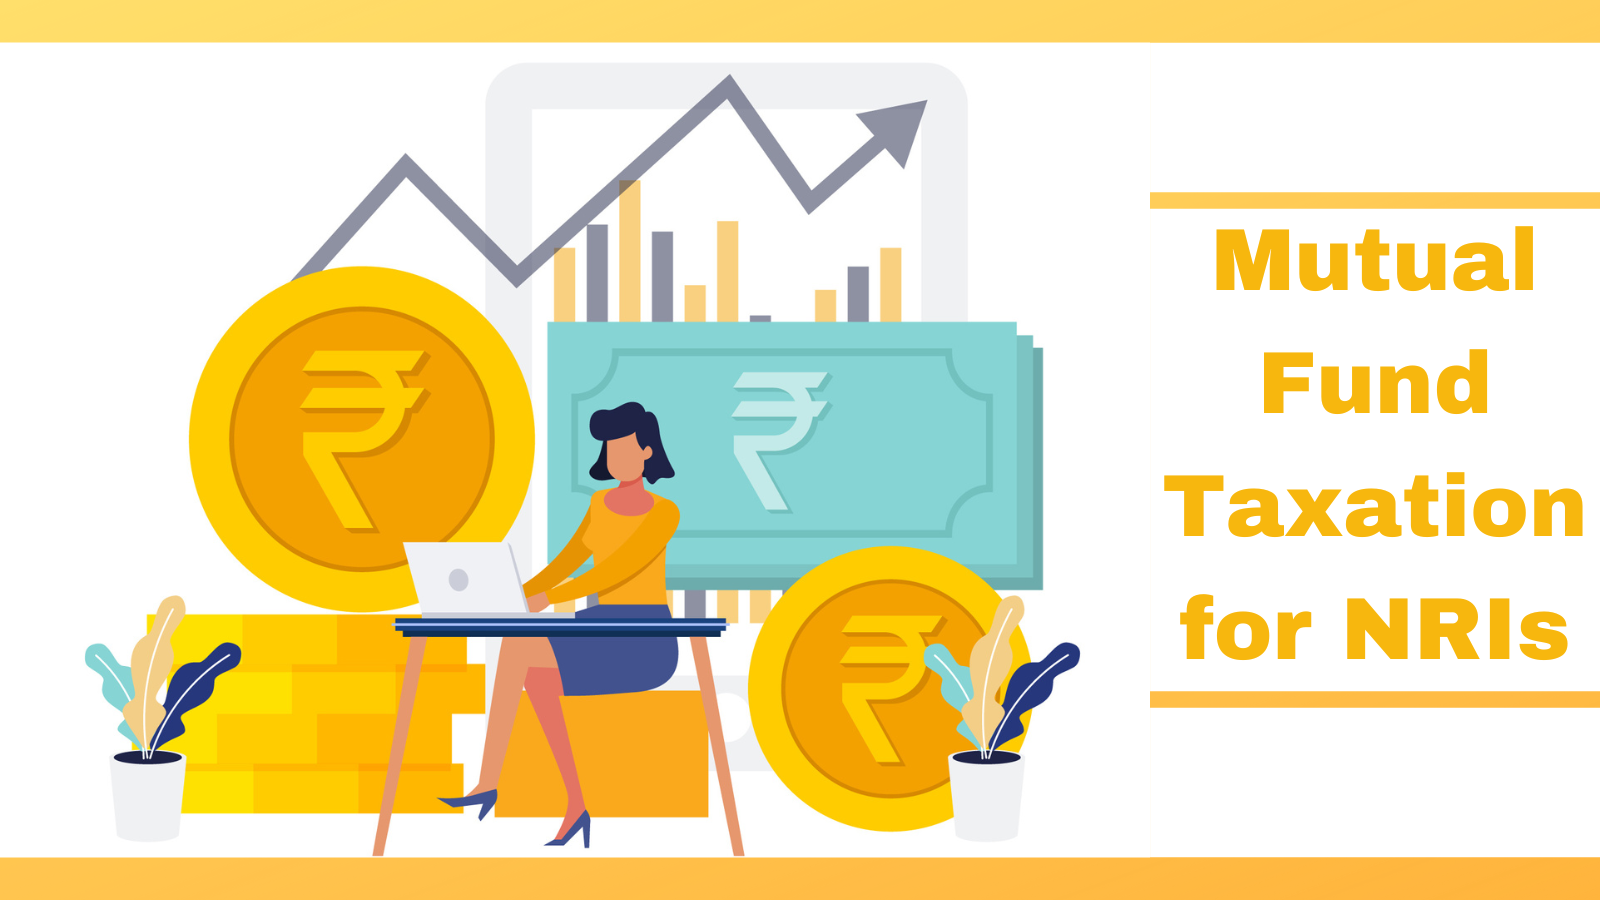 Mutual Fund Taxation for NRIs